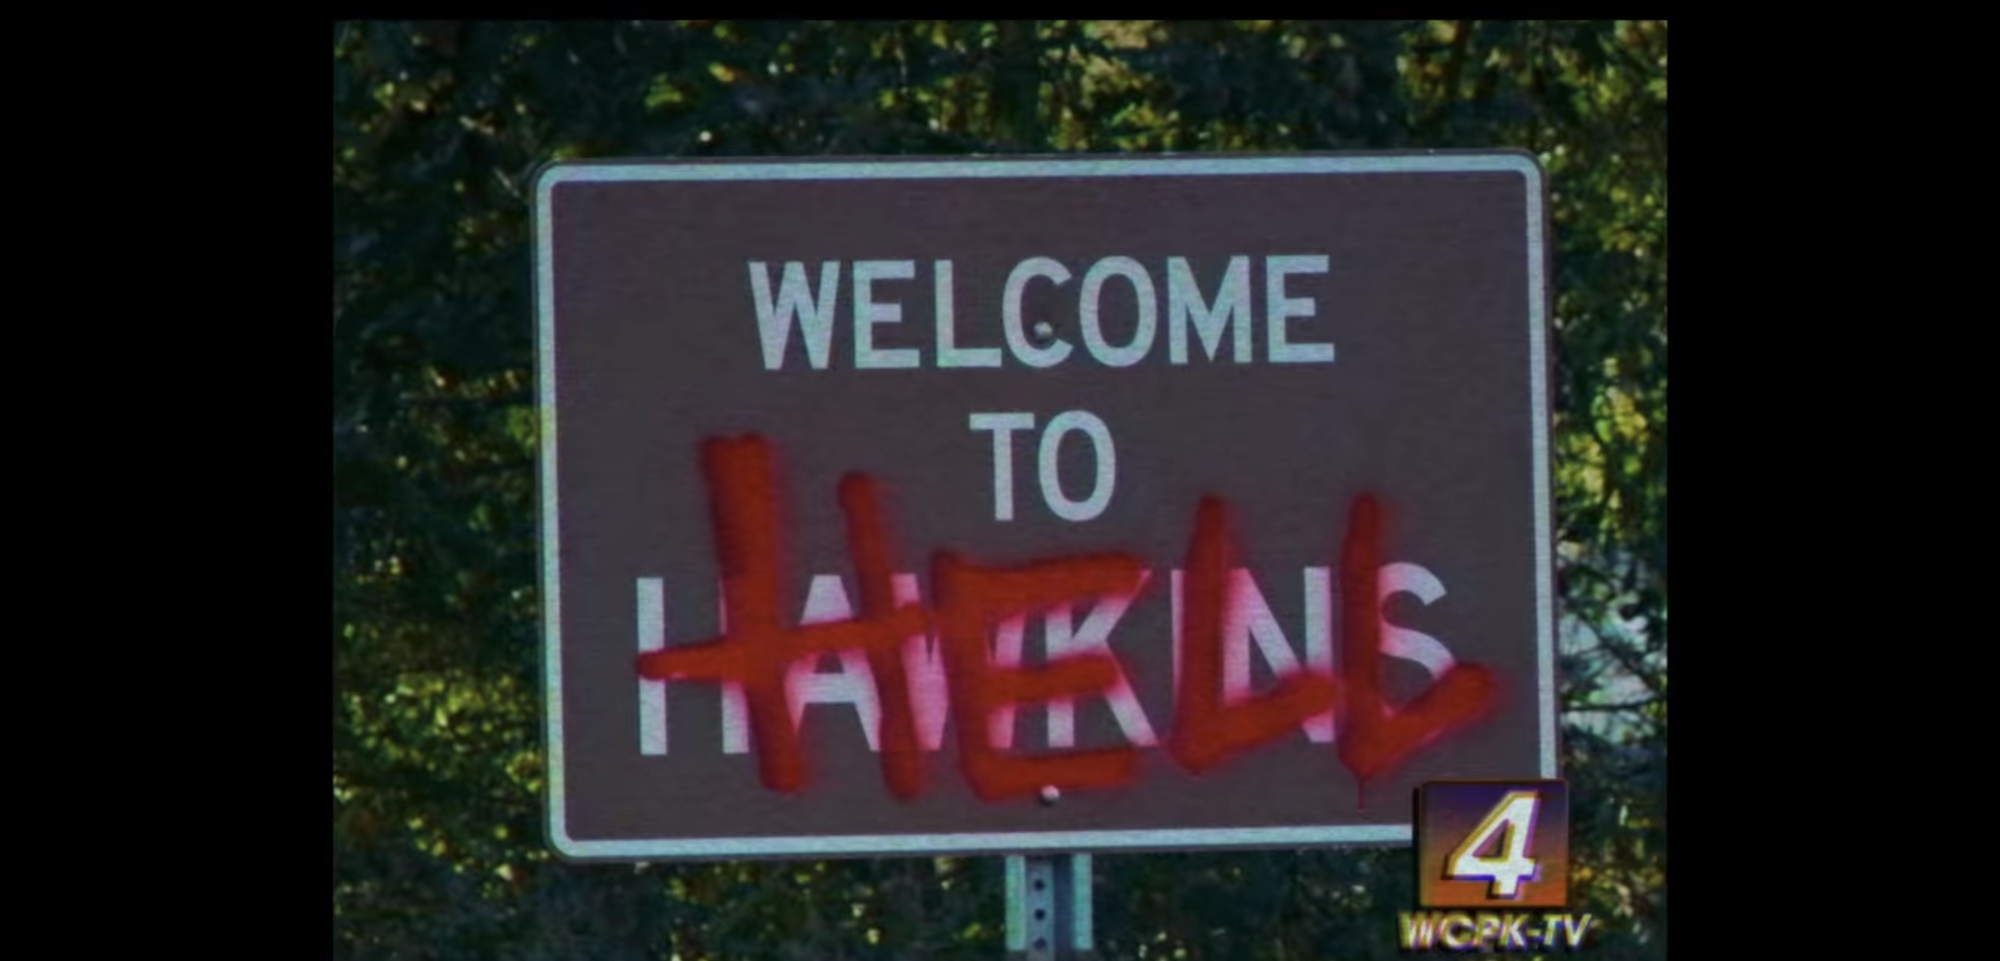 A road sign saying "Welcome to Hawkins" with the word "Hell" spray painted over the word "Hawkins" in a scene from 'Stranger Things' Season 3